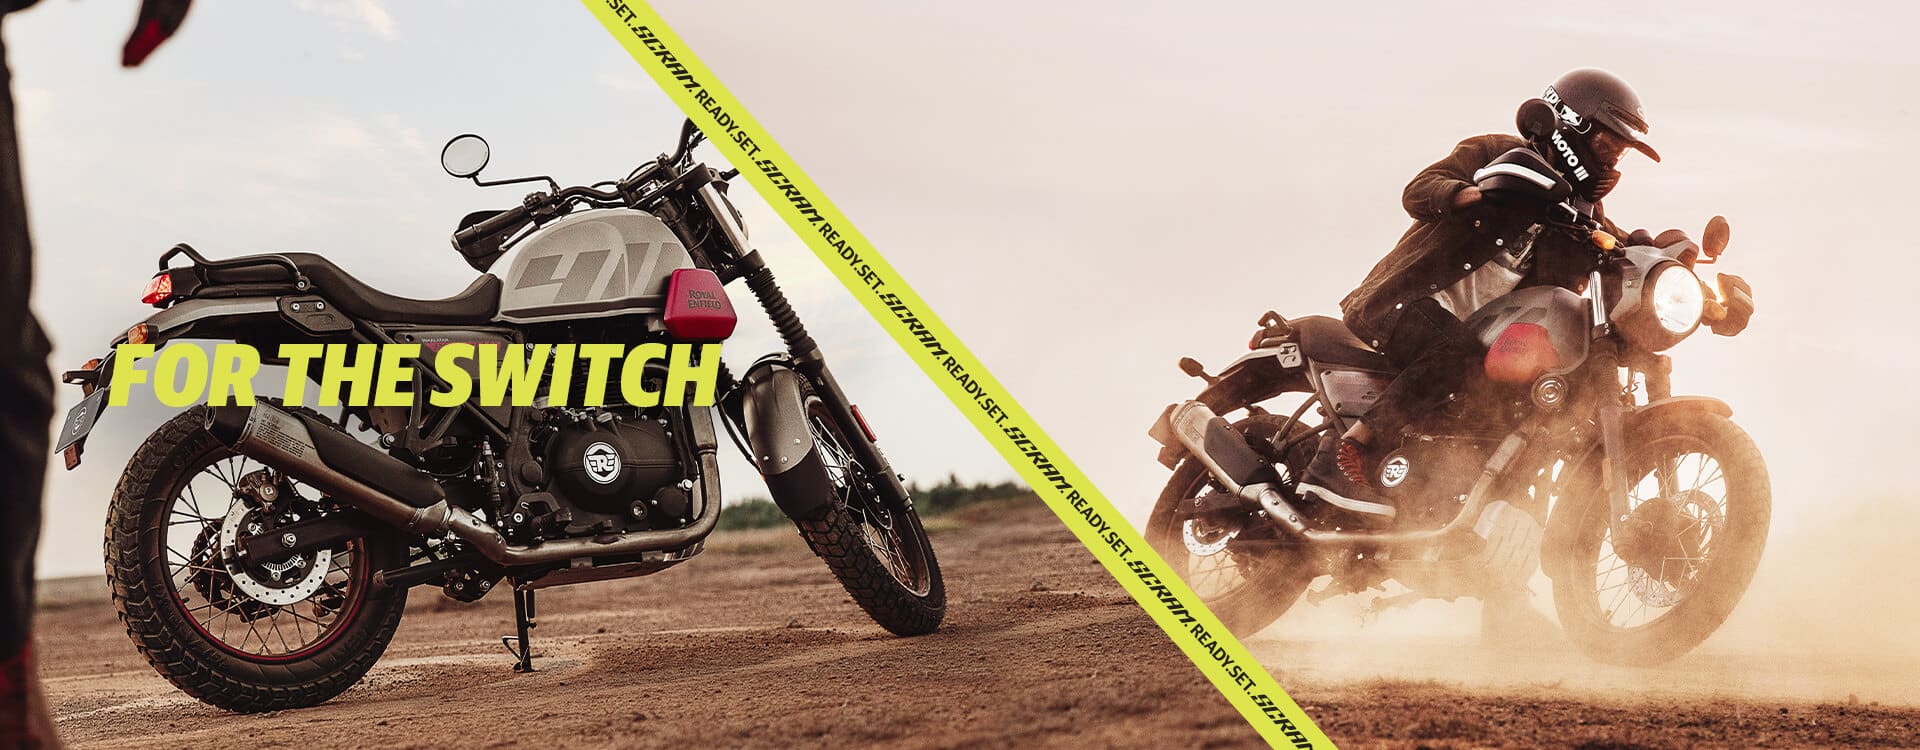 The Royal Enfield Scram's dual purpose tires ensure sure footed grip on multiple surfaces